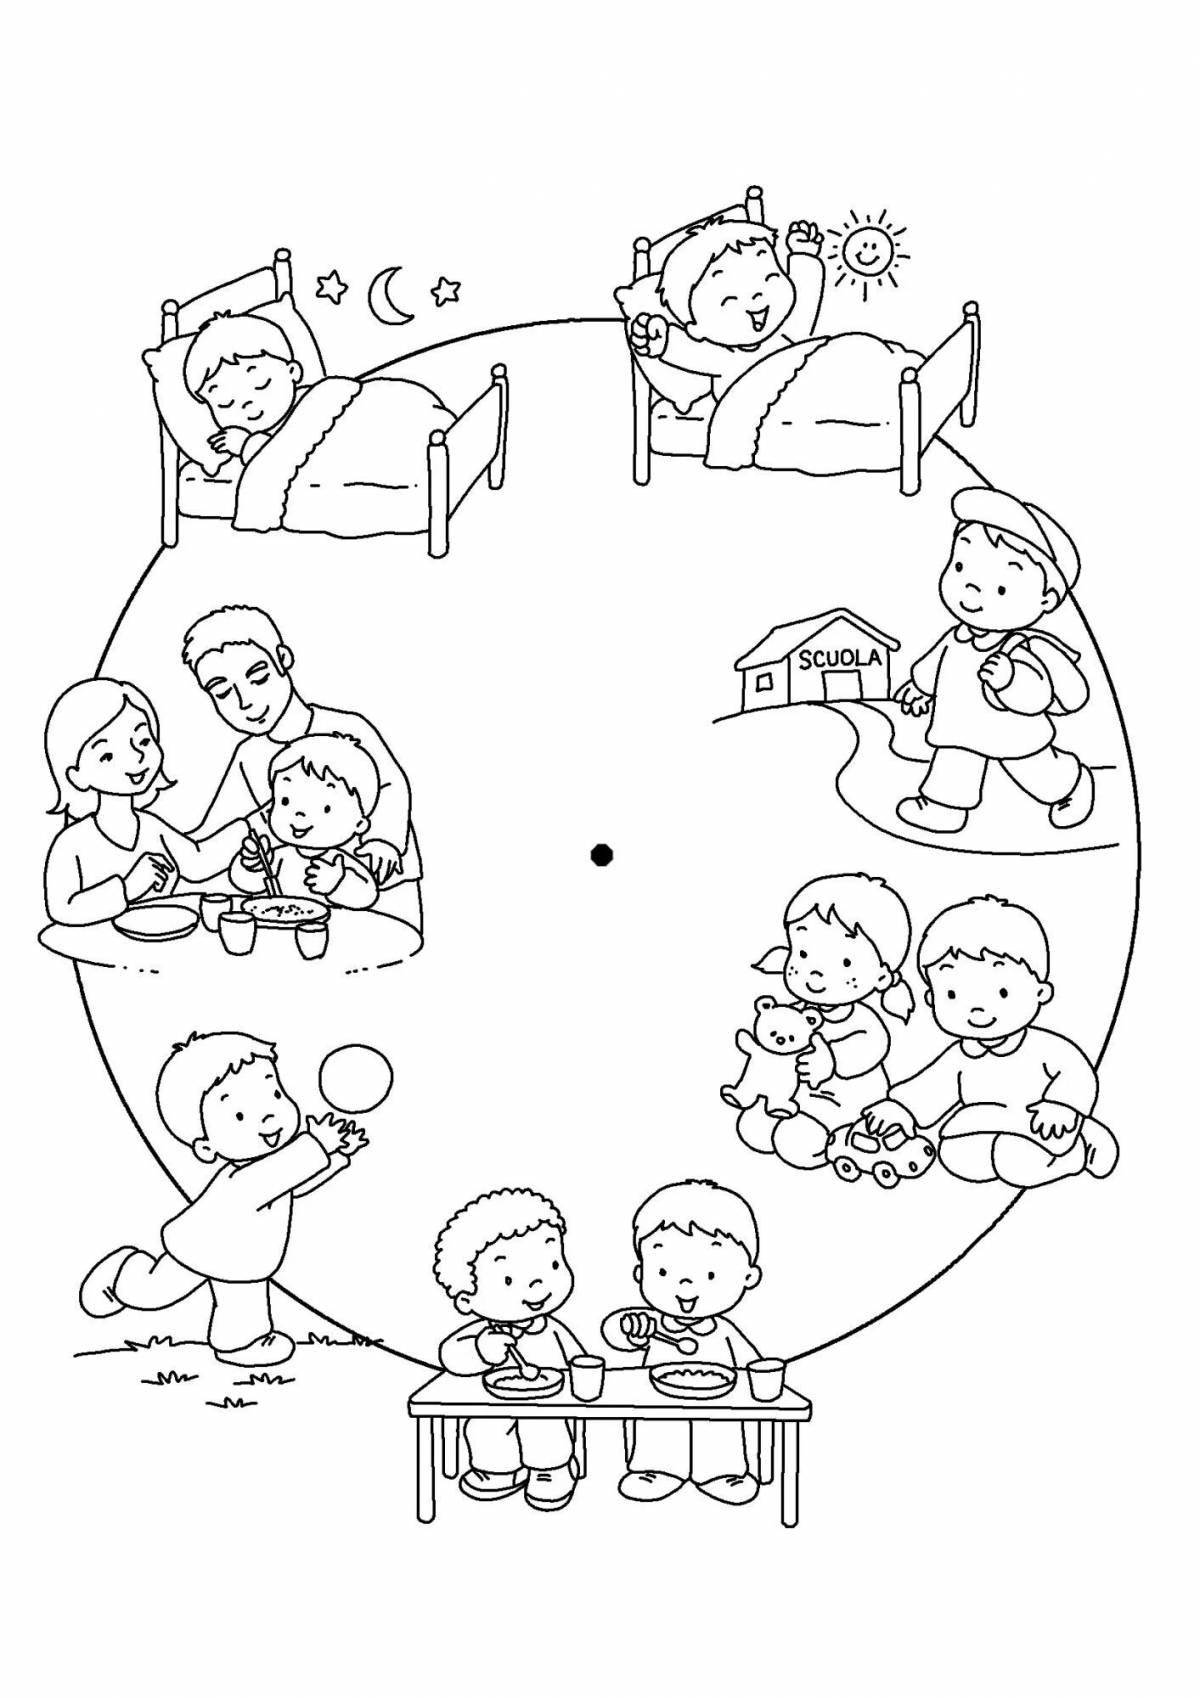 Color-explosive time of day coloring page for kids